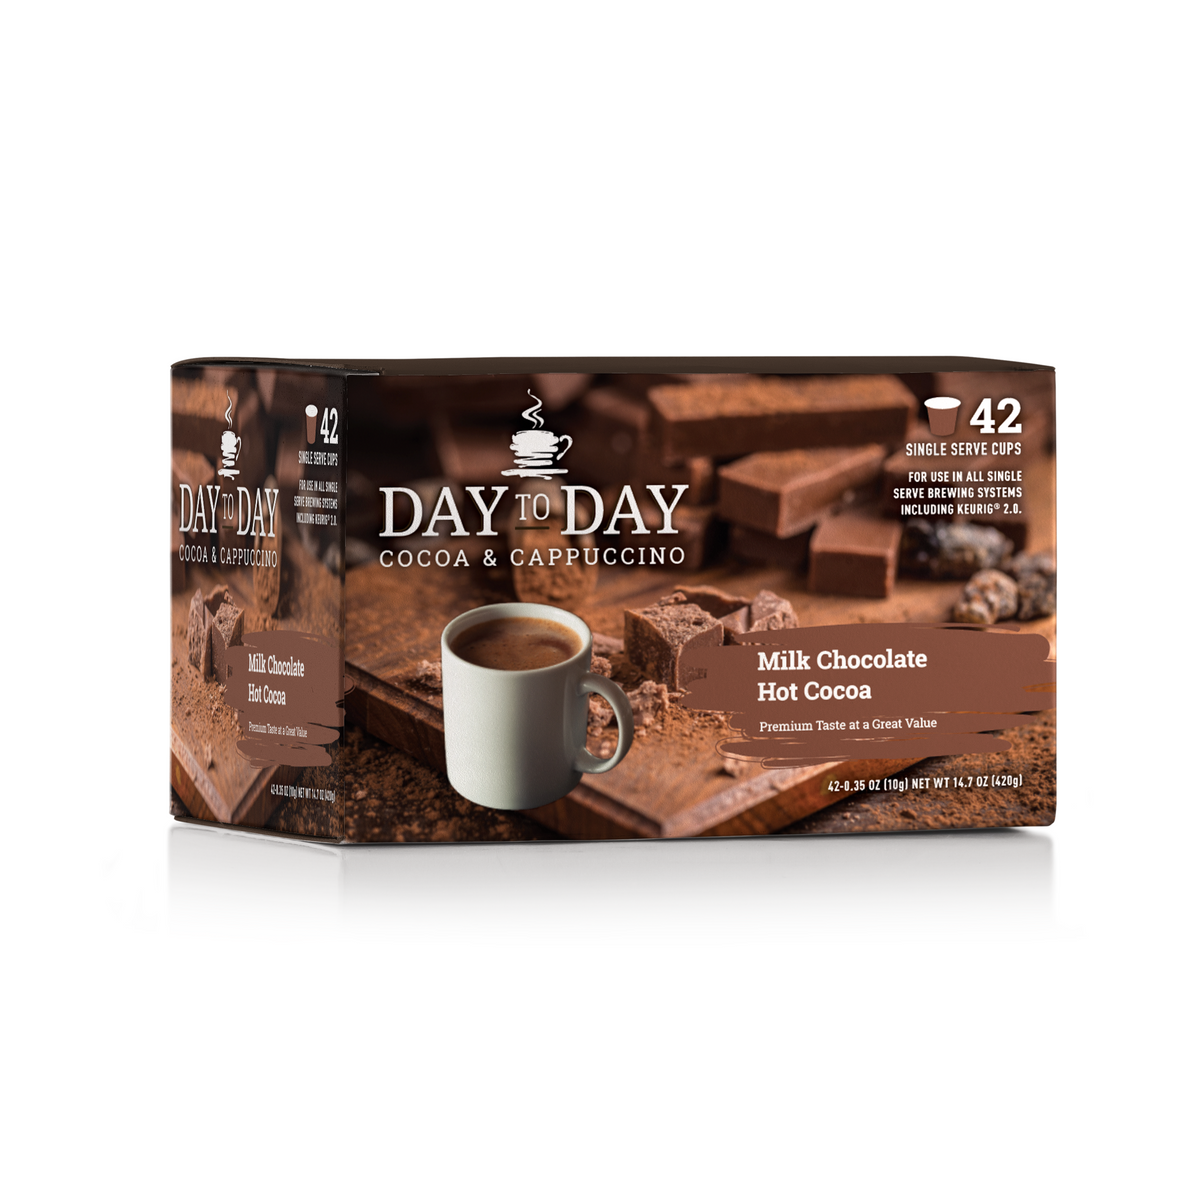 Day to day coffee 42 count hot cocoa medium roast coffee pods for single serve coffee brewer